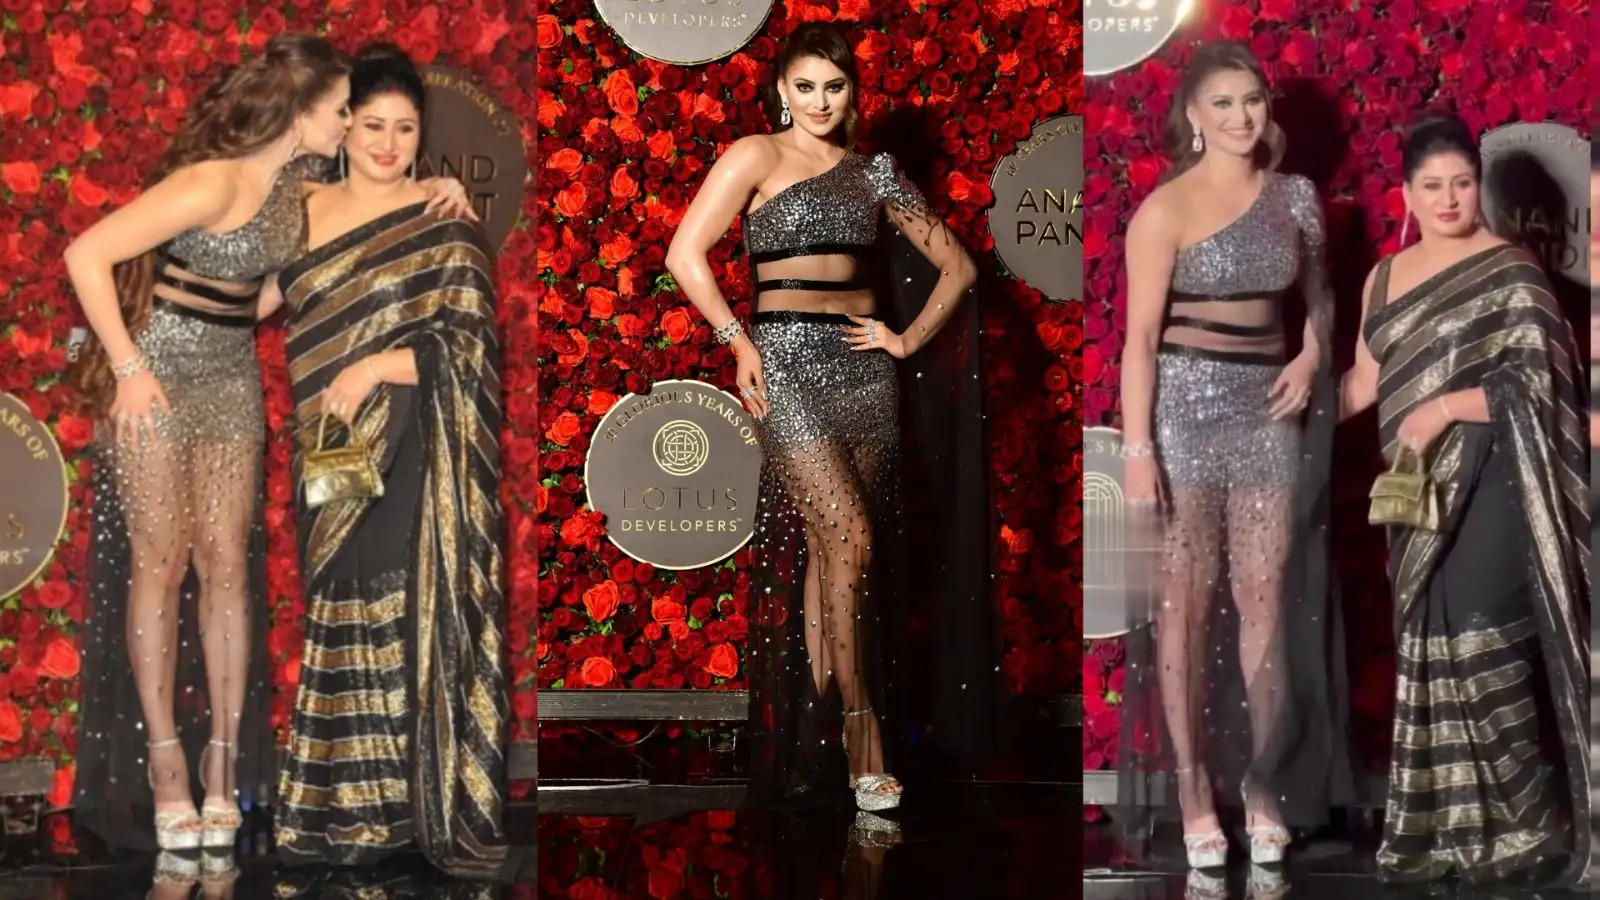 Urvashi Rautela Shines bright like a Diamond in Gunika Mehra's 95,000Rs Outfit Plants a Peck On Her Mother Meera Rautela As The Duo Graces Anand Pandit's 60th Birthday Bash 